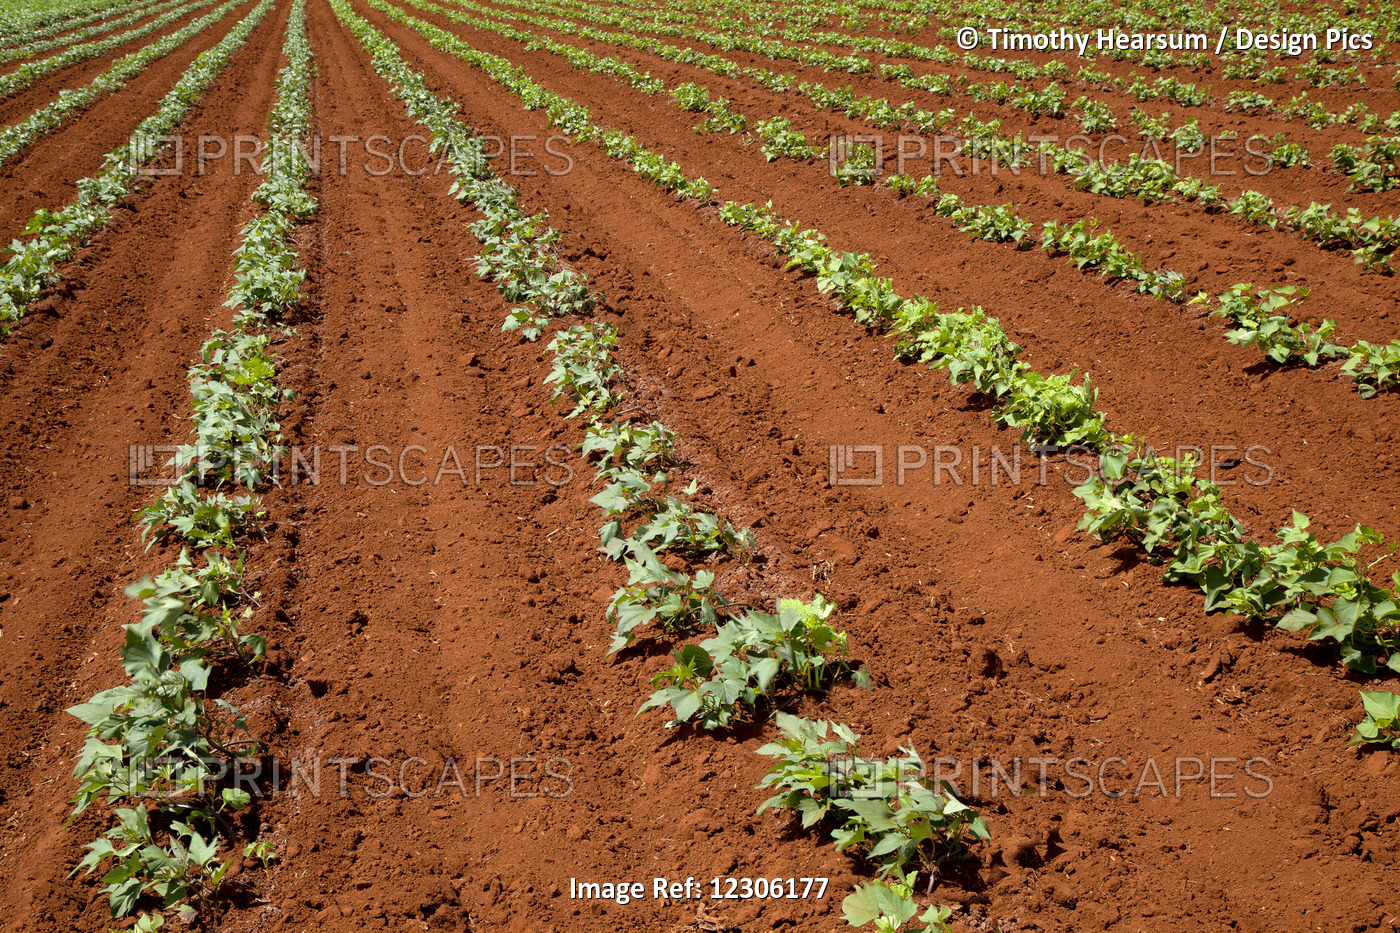 Oblique Rows Of Young Green Bean Plants Are Growing In Very Red Earth On An ...